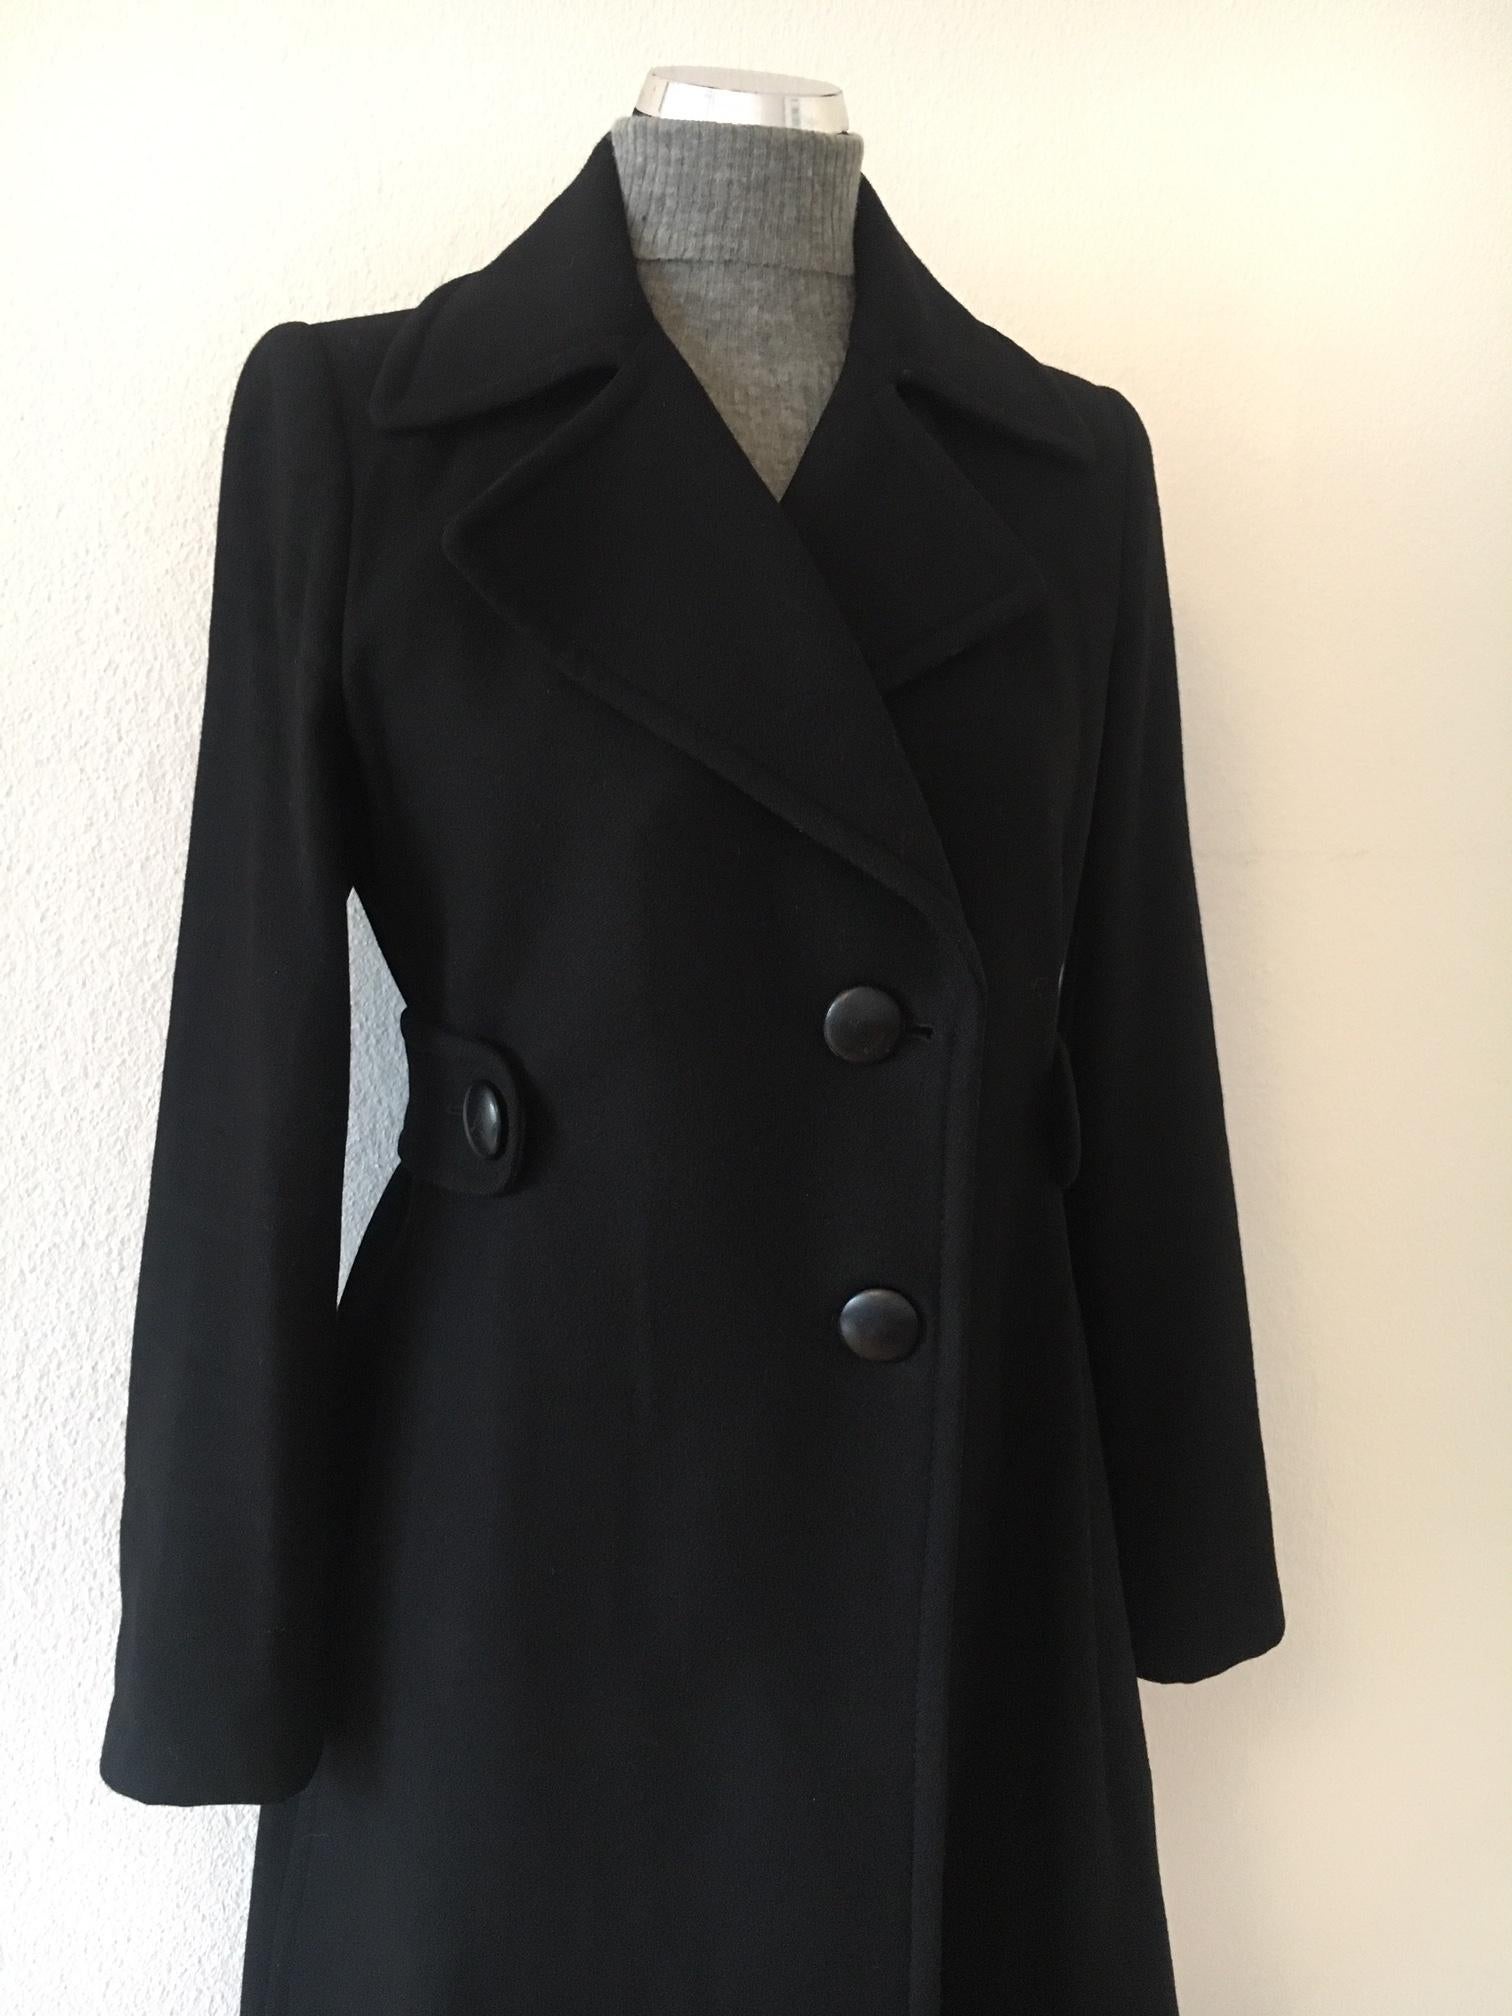 Elegant black wool and cashmere coat from Stella McCartney.
Redingote style, hollow fold in the back.
Leather buttons holging a back and side martingale.
Made in Hungary.
50% Wool 50% cashmere beautiful quality fabric.
Size 42, fitted